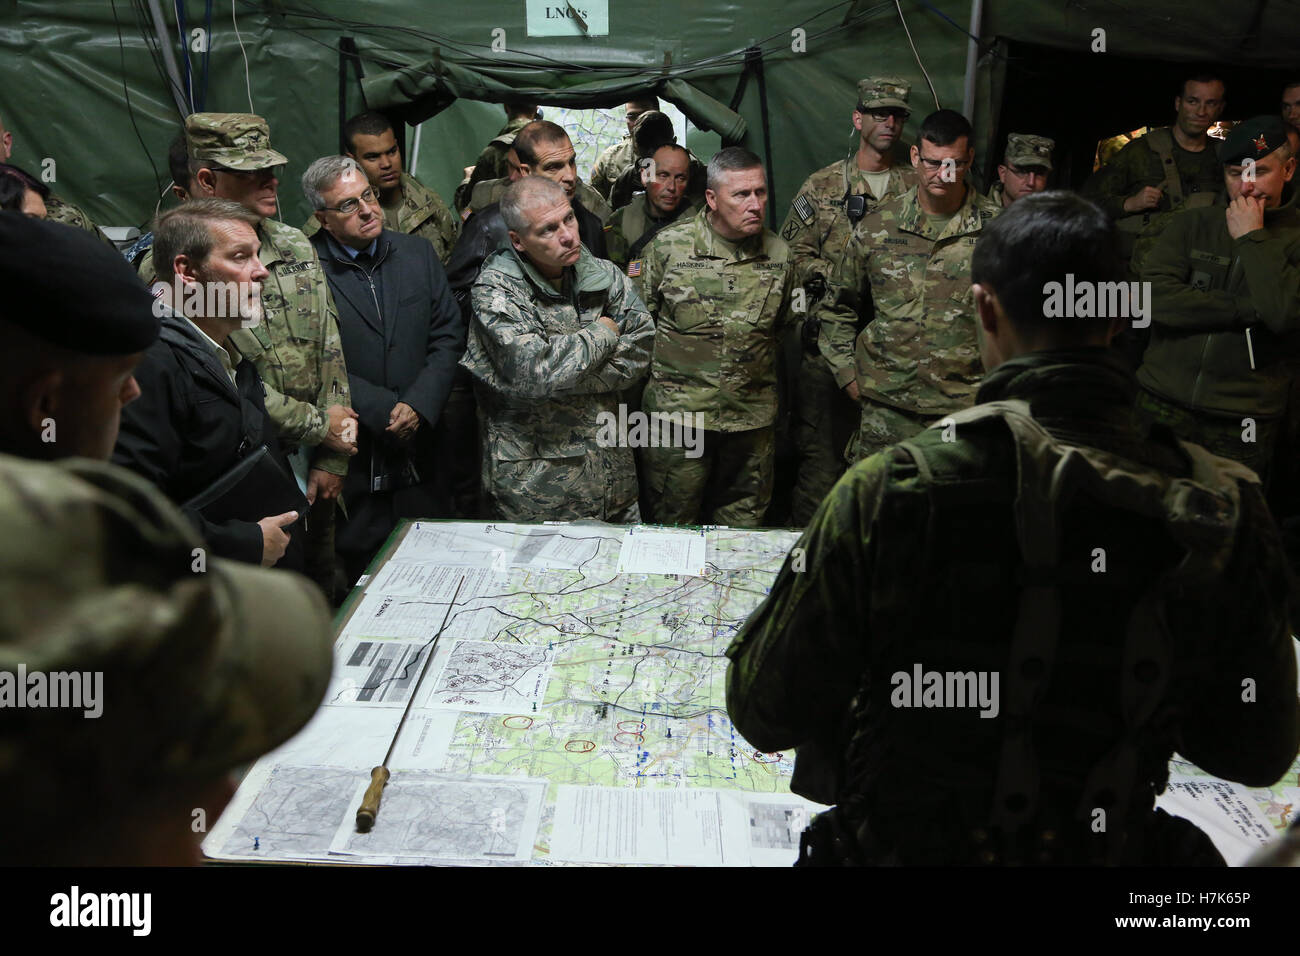 NATO Alliance senior leaders conduct a mission brief while managing a tactical operations center during exercise Allied Spirit V at the Hohenfels Training Area October 11, 2016 in Hohenfels, Germany. Stock Photo